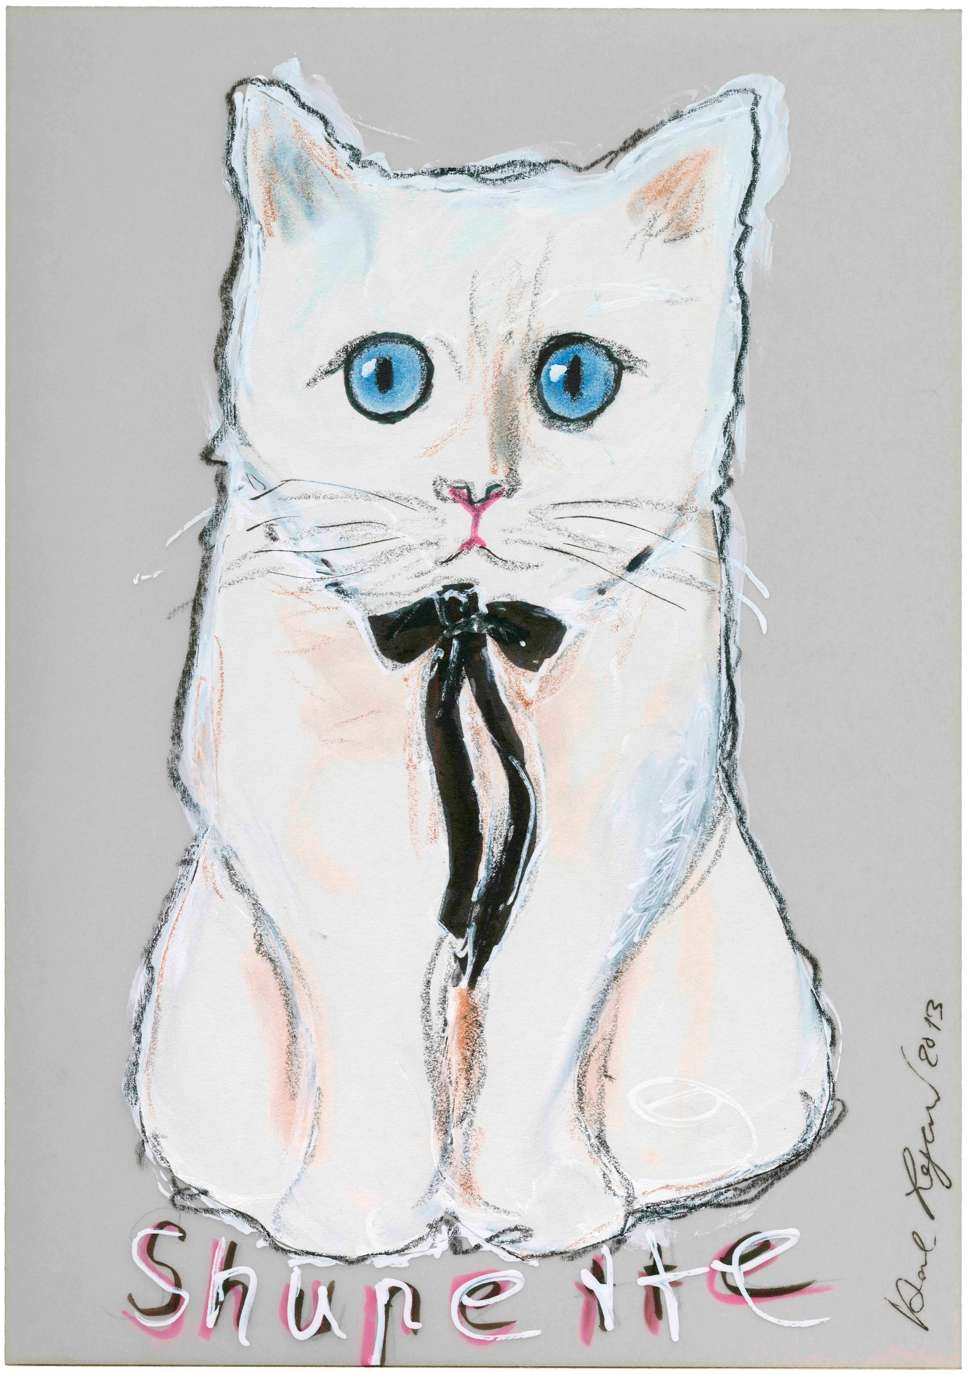 A drawing of Karl Lagerfeld's cat Choupette, done by the designer himself. Shupette is a character created by Shu Uemura